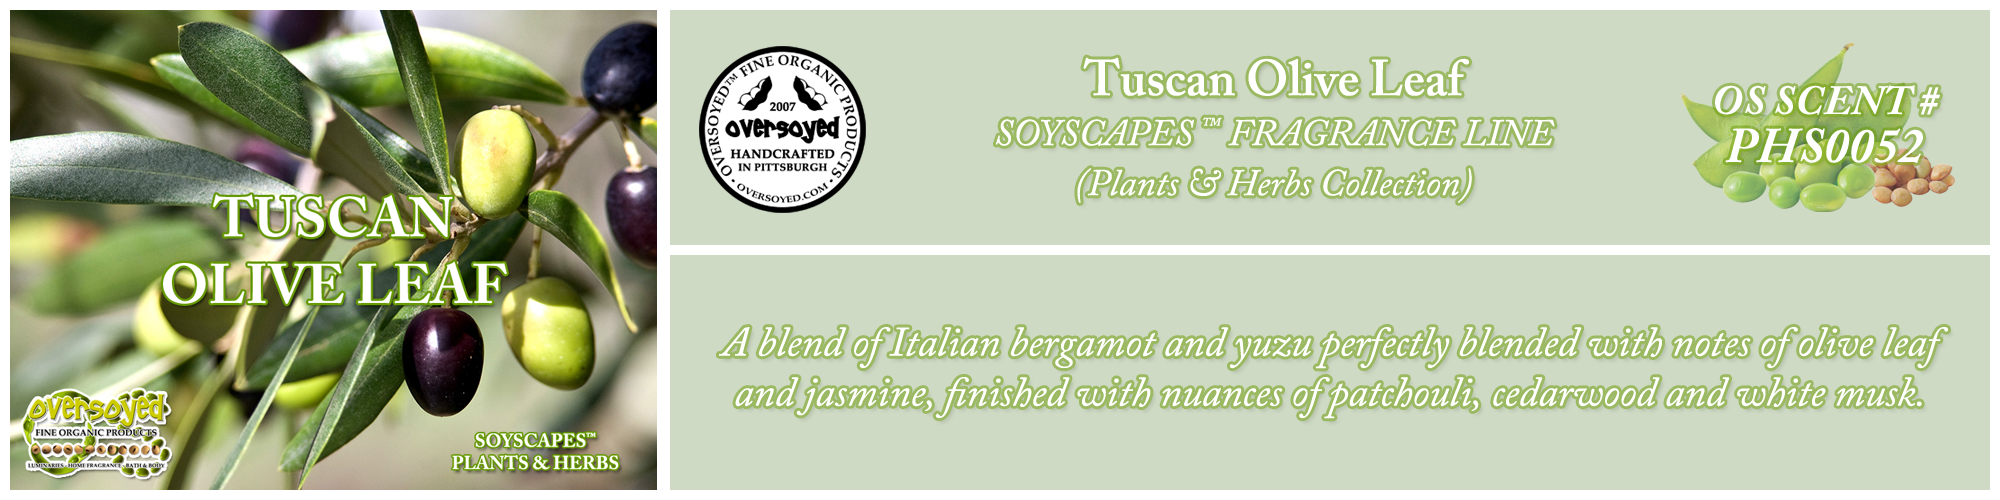 Tuscan Olive Leaf Handcrafted Products Collection